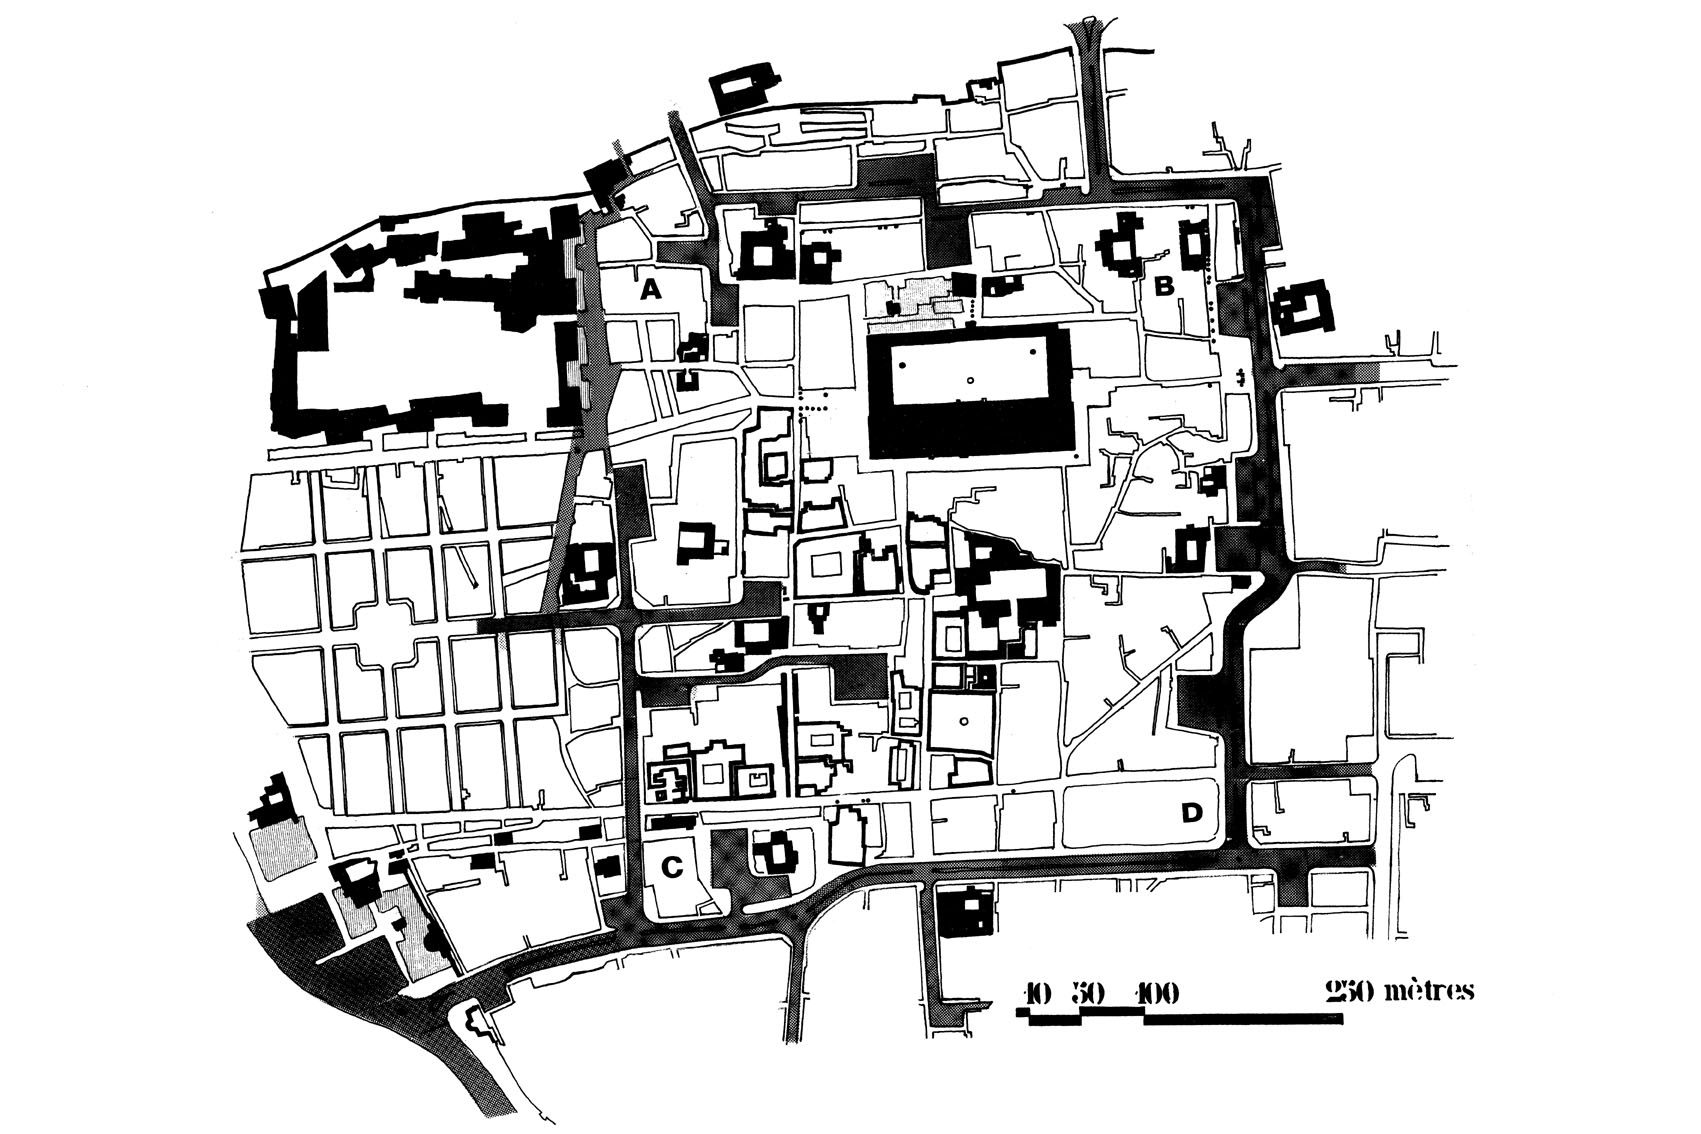 Development plan for Old Town with sections marked by letters